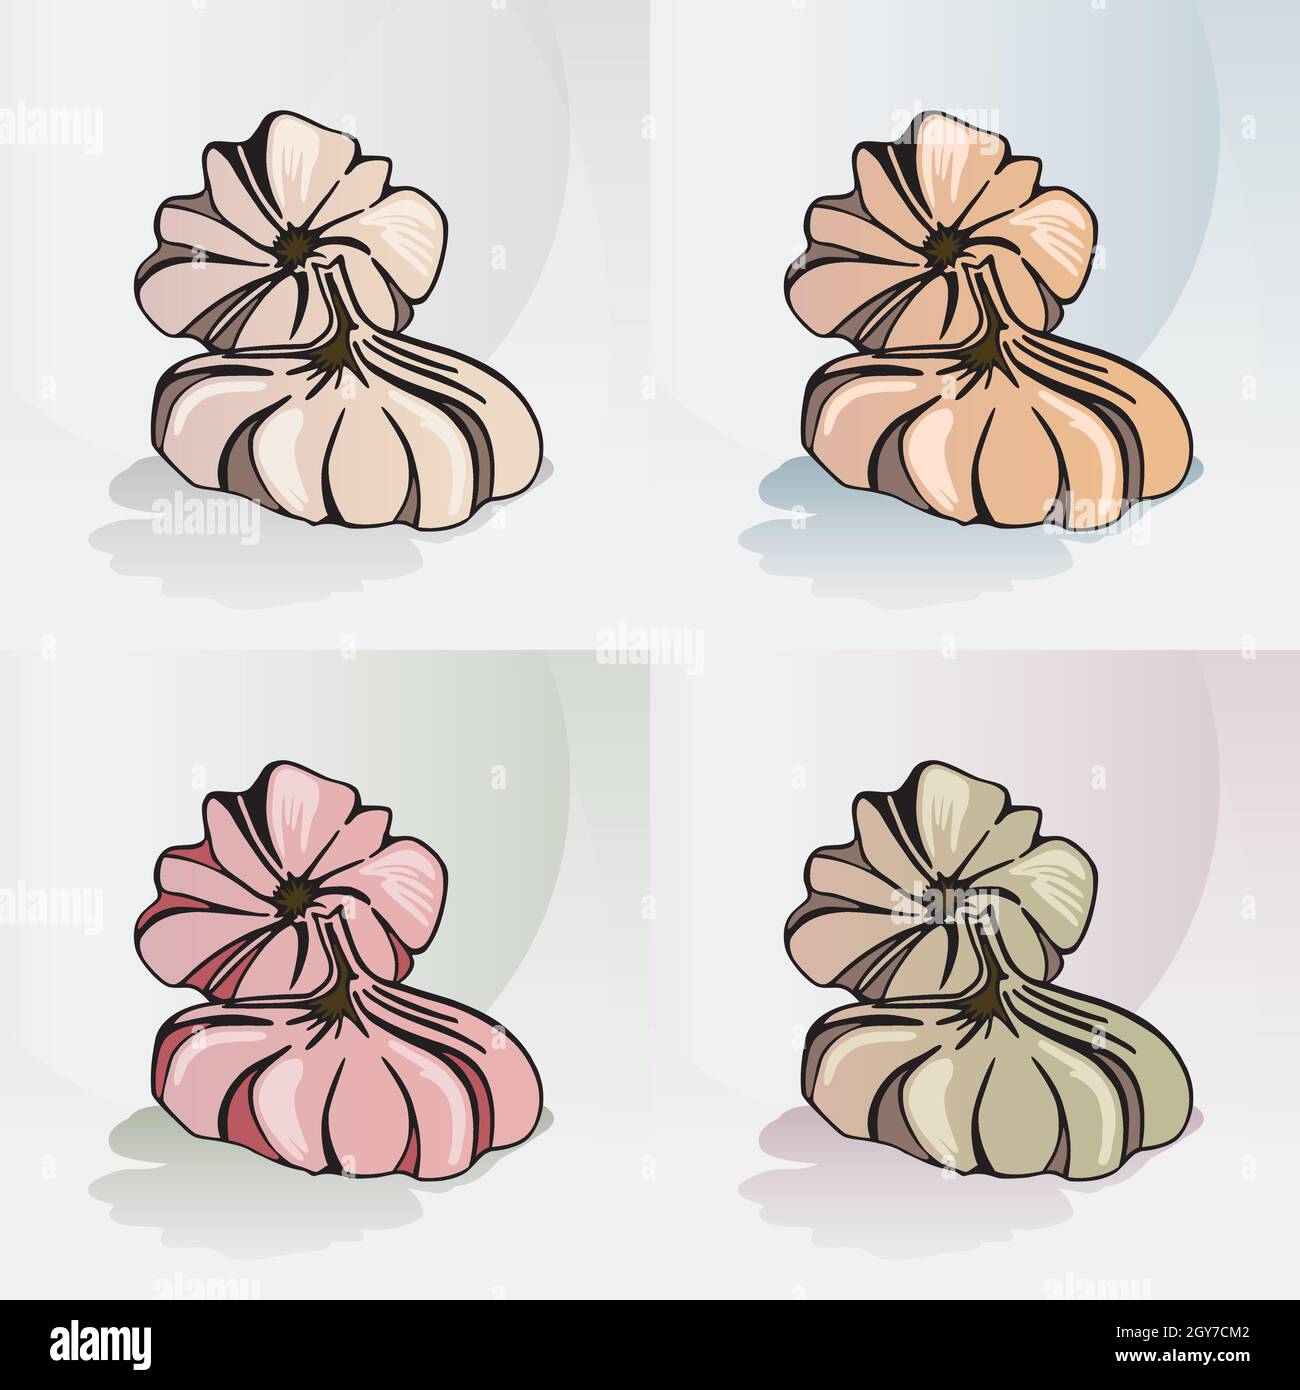 Garlic - Vegetable 4 Original Hand Drawn Illustrations on different Backgrounds - Natural and Healthy Food Icon Stock Vector